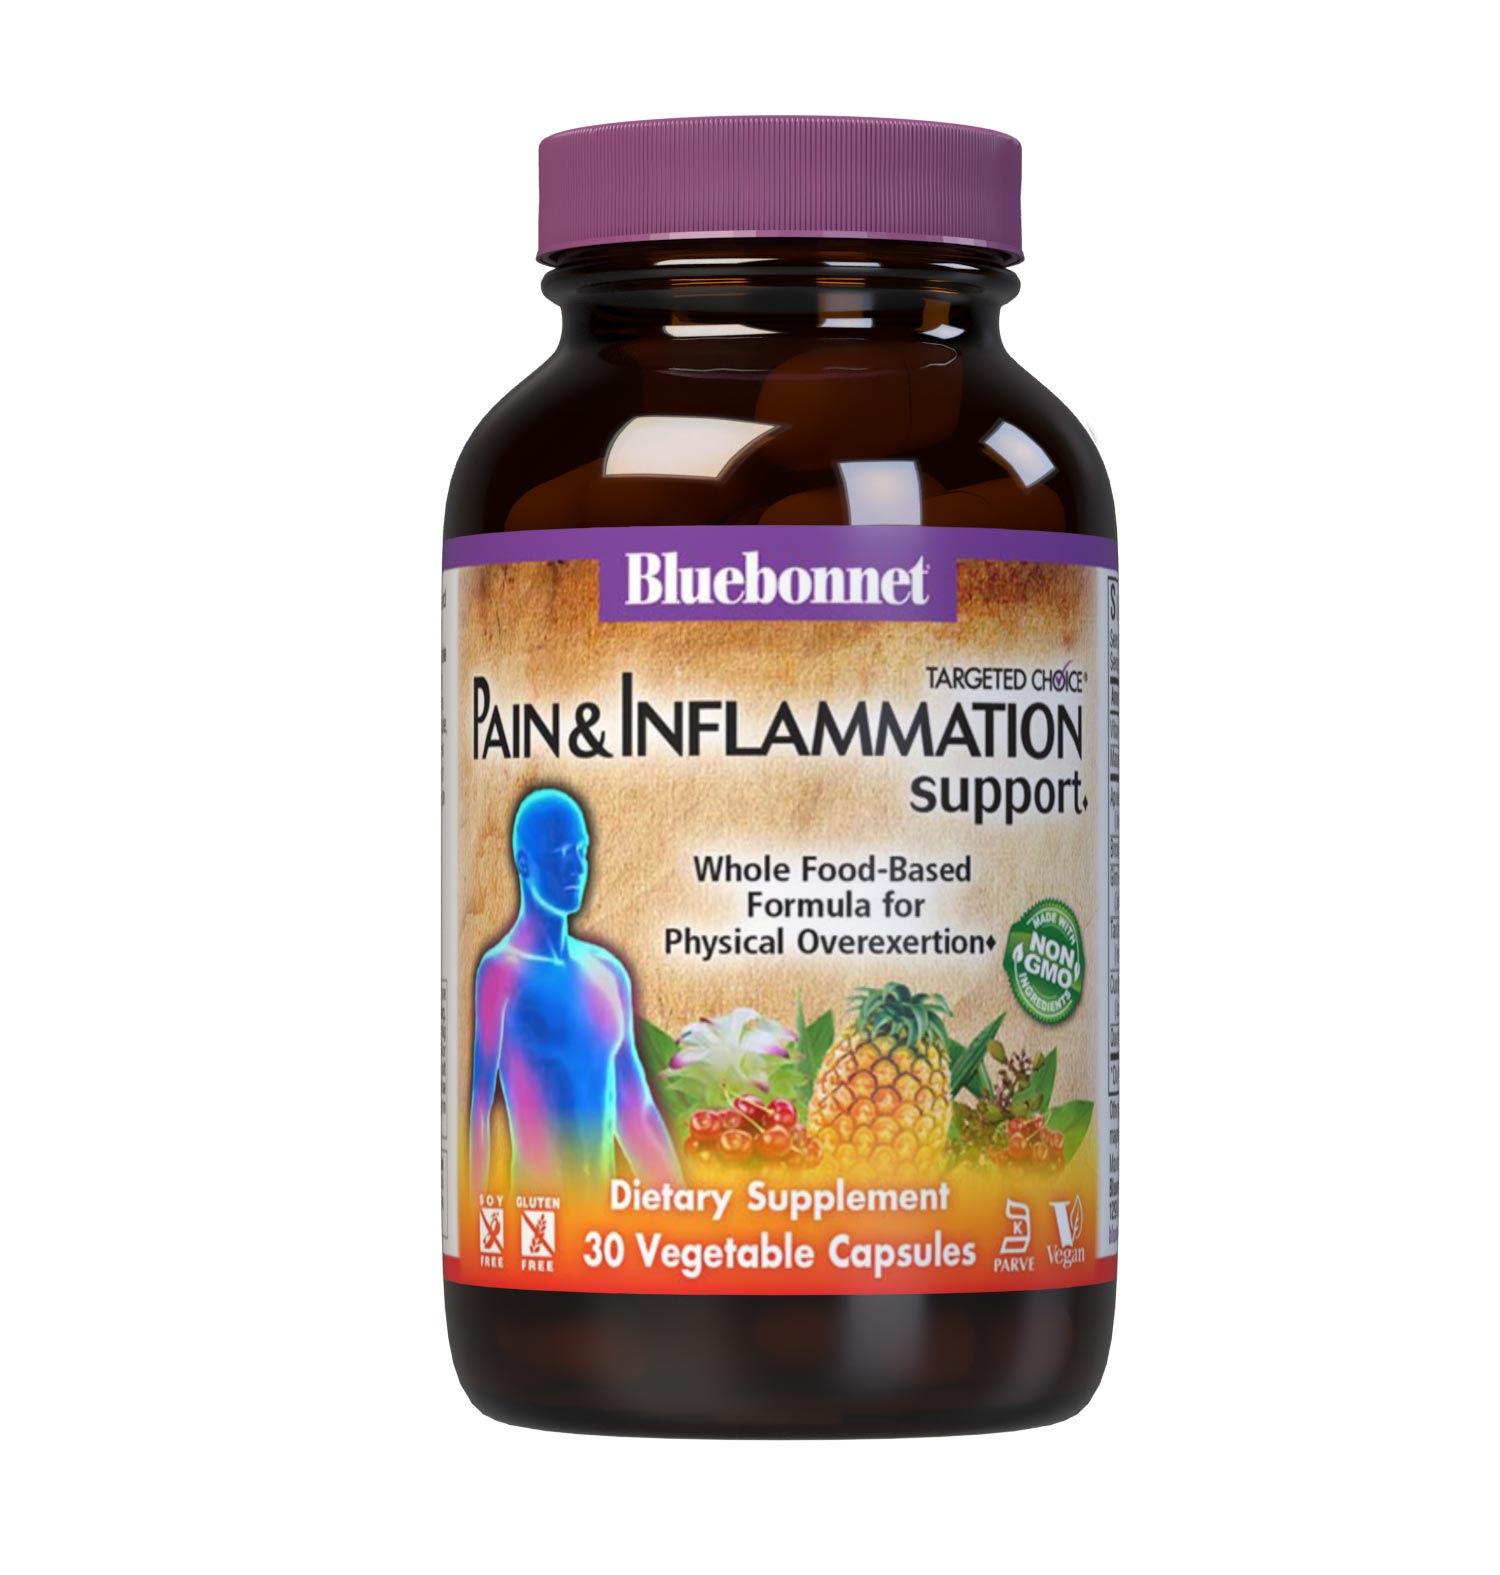 Bluebonnet’s Targeted Choice Pain and Inflammation Support 30 Vegetable Capsules are specially formulated with a unique blend of sustainably harvested or wildcrafted herbal extracts, such as CurcuWin (46 x more bioavailable turmeric root extract) and ApresFlex (52% more bioavailable, patent-pending boswellia gum resin extract). #size_30 count